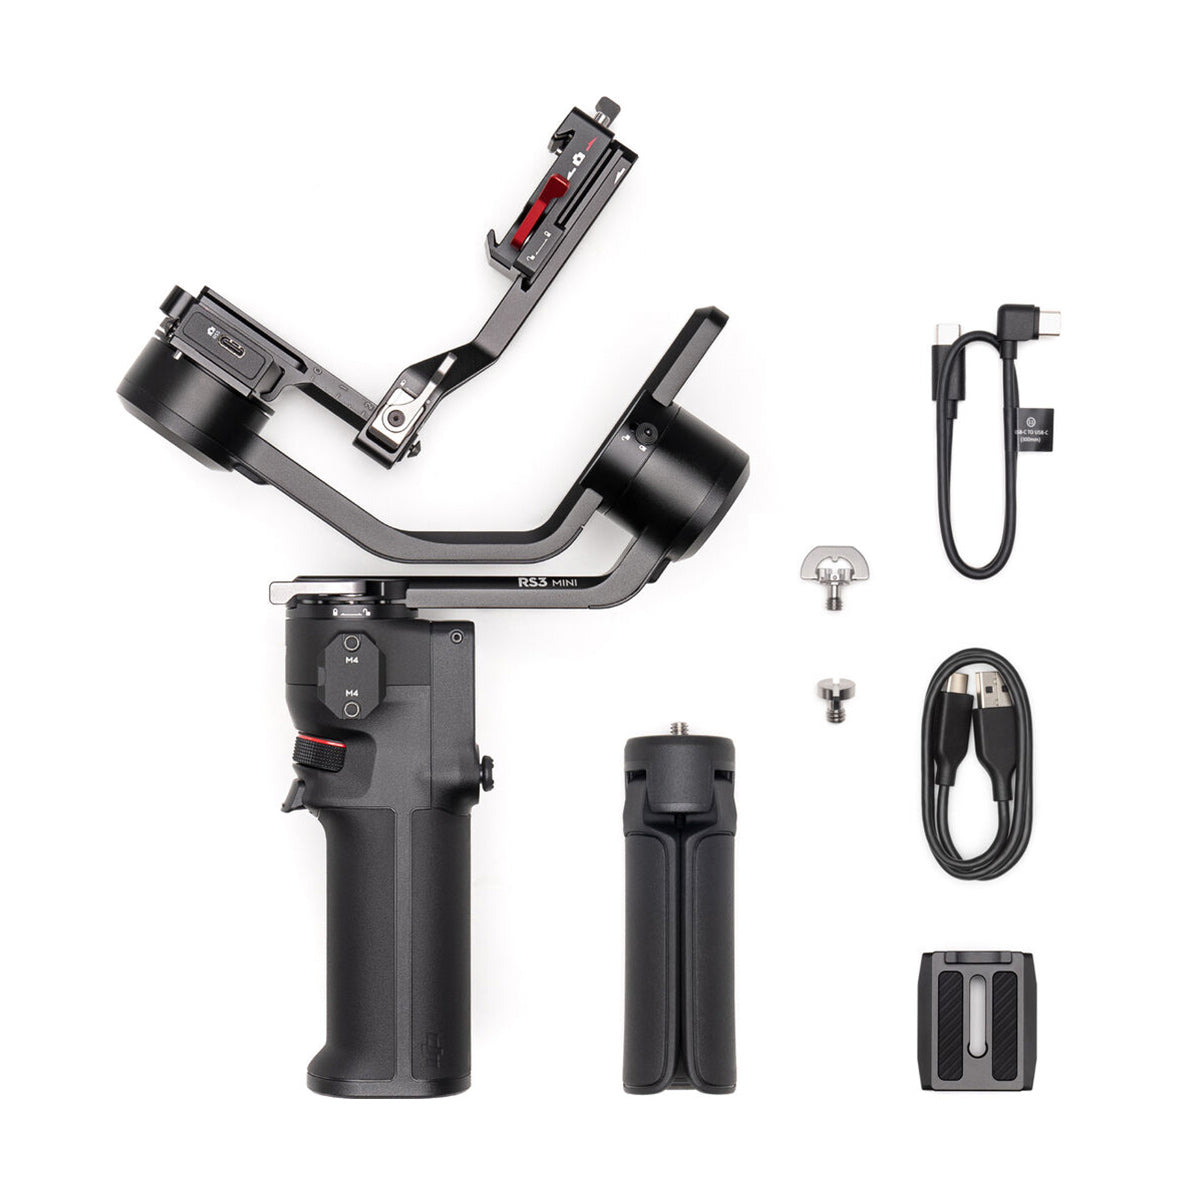 DJI RS 3 Pro Handheld 3-Axis Gimbal Stabilizer for DSLR Cameras  (CP.RN.00000219.01) 